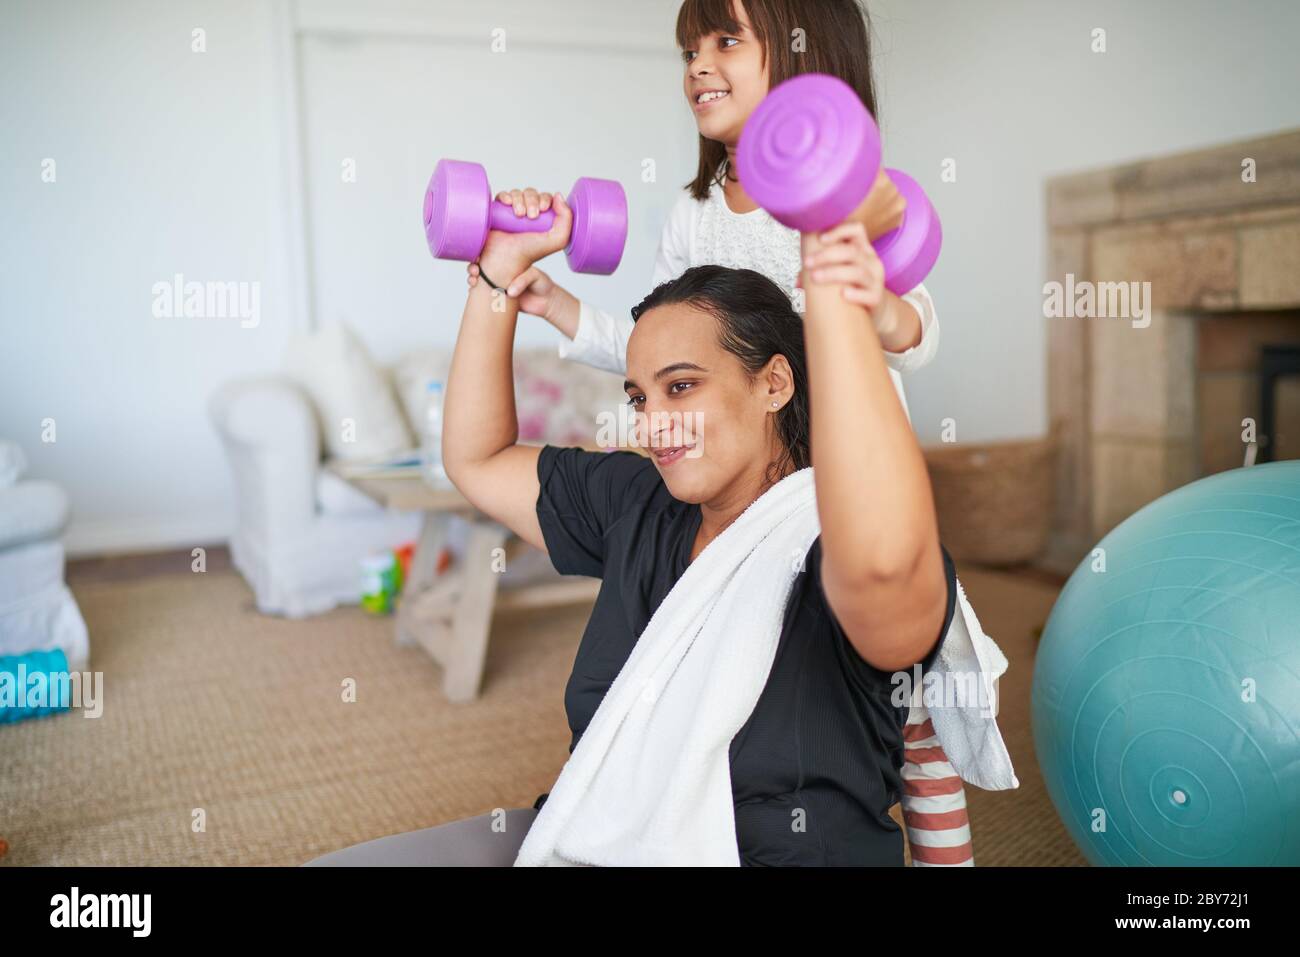 Daughter helping mother exercise with dumbbells in living room Stock Photo